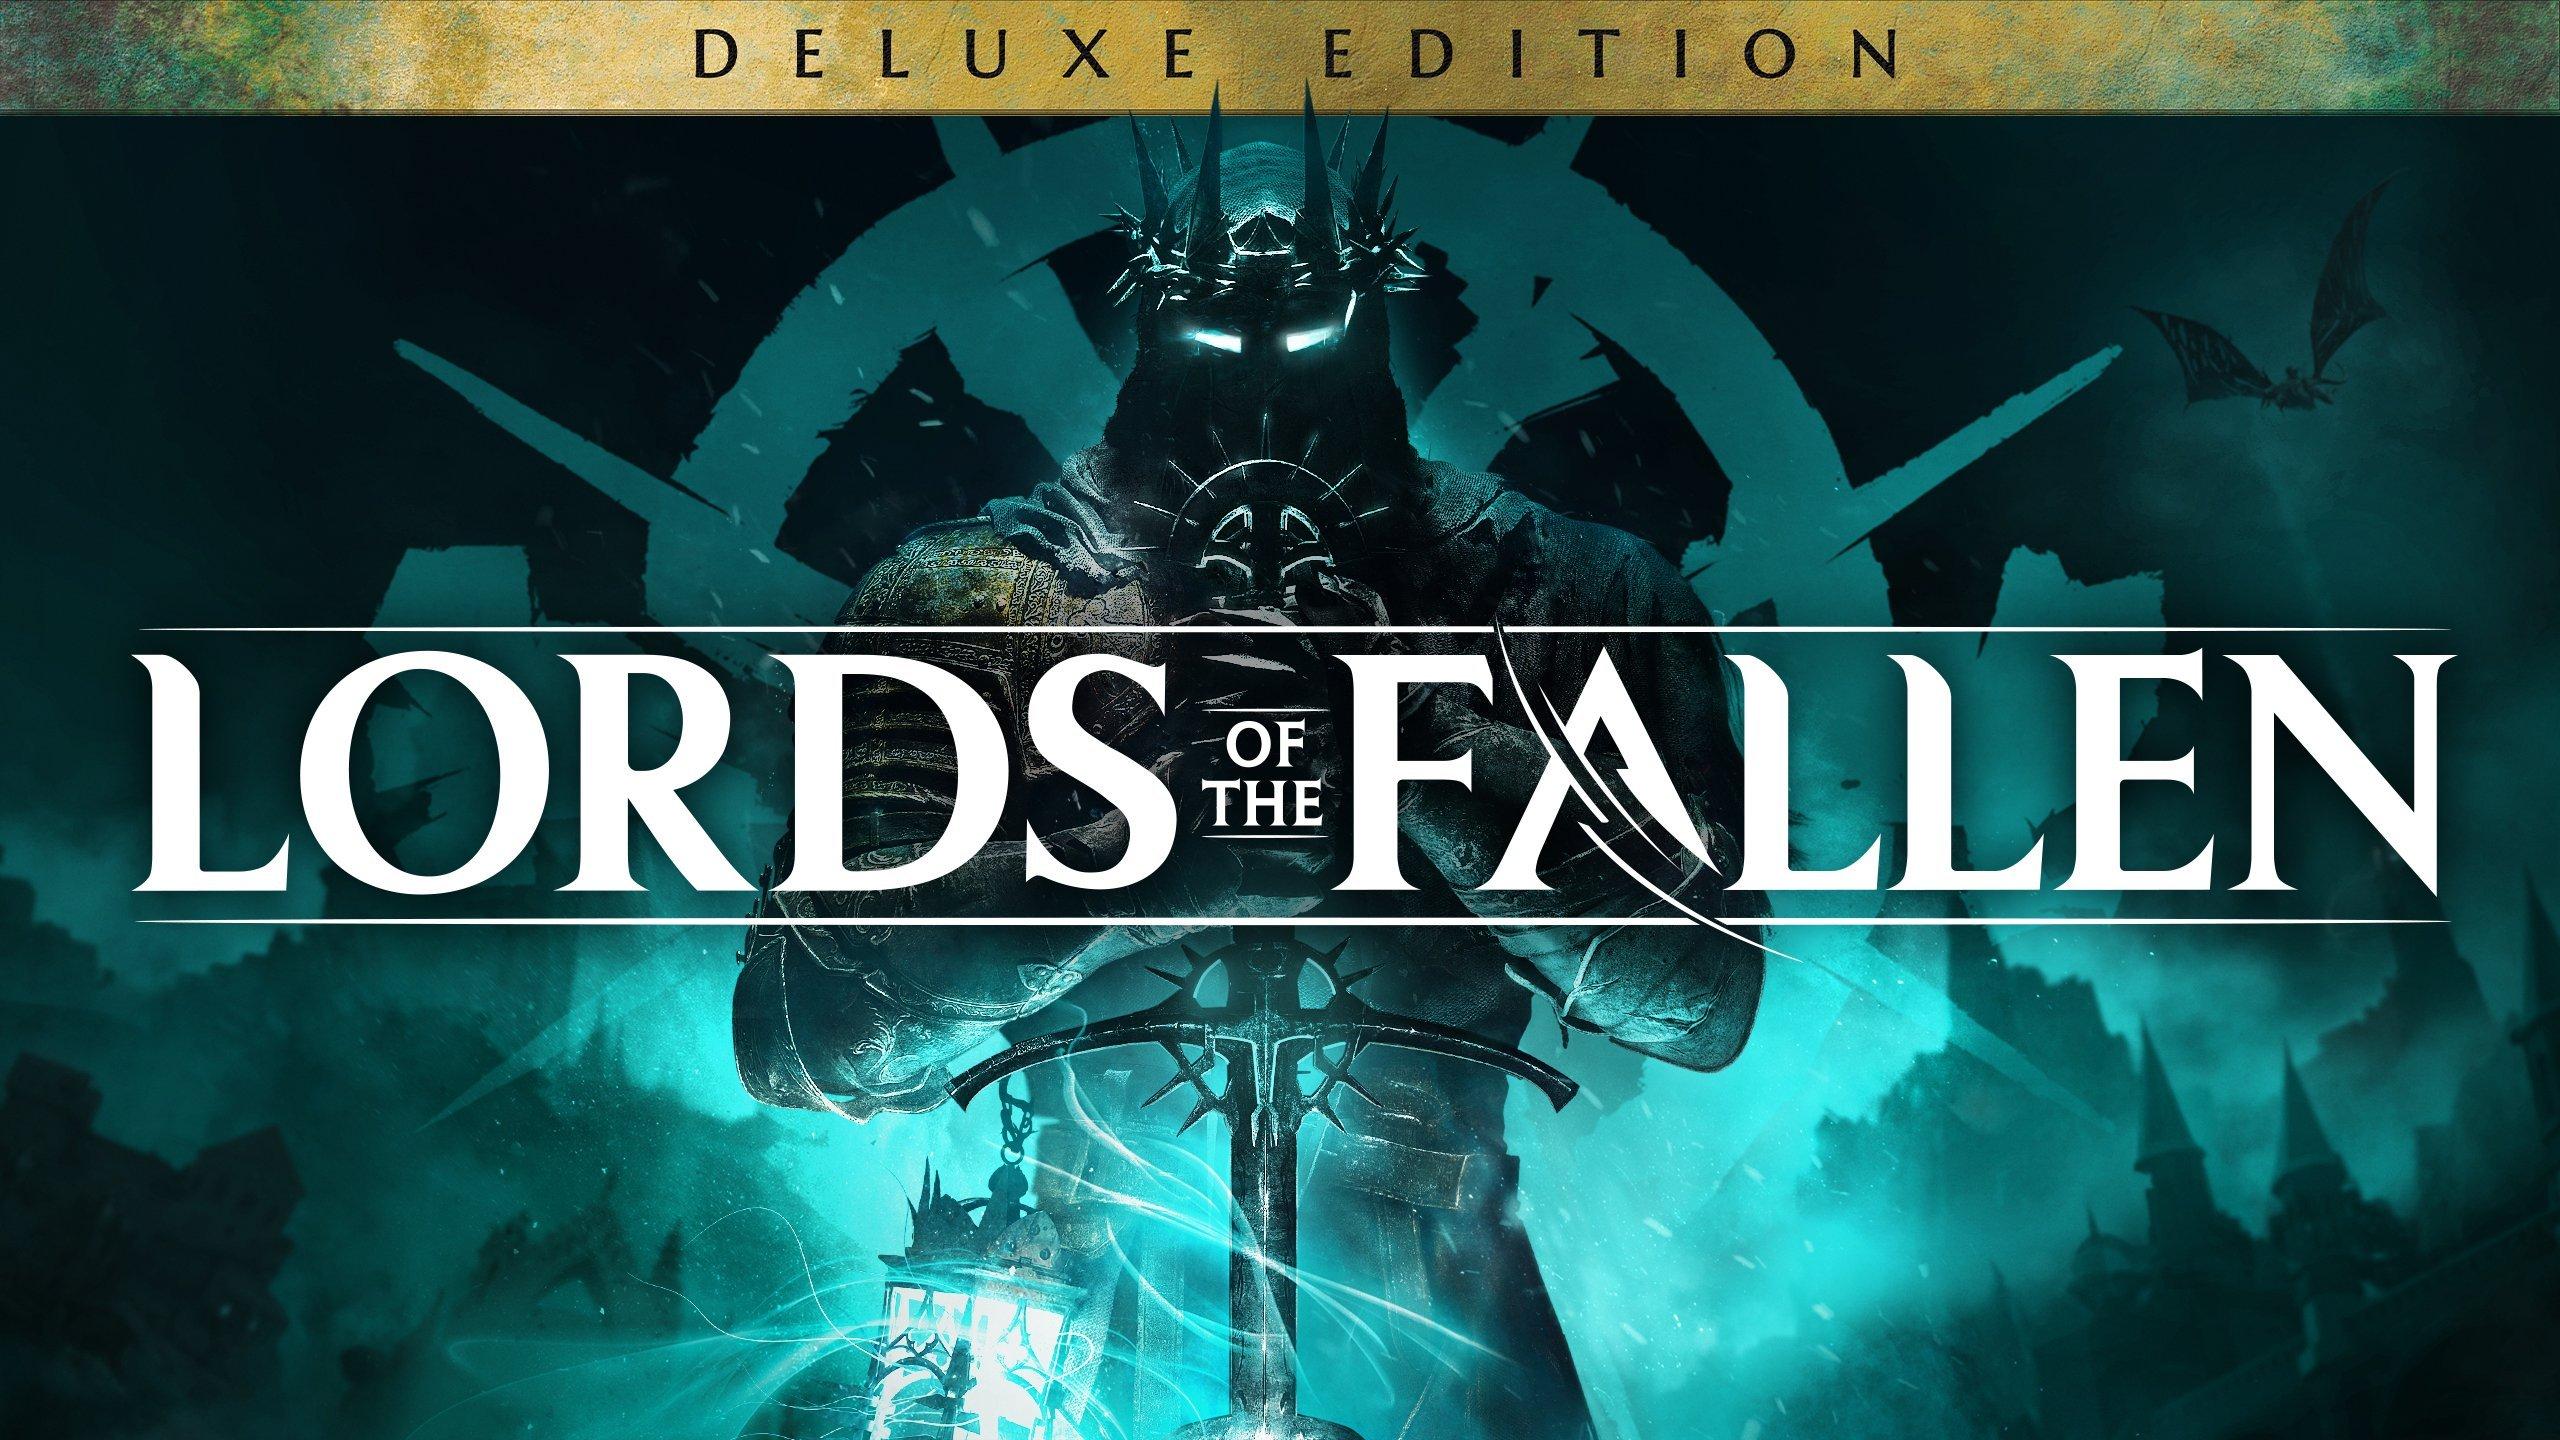 Lords of the Fallen Deluxe Edition, PC Steam Game